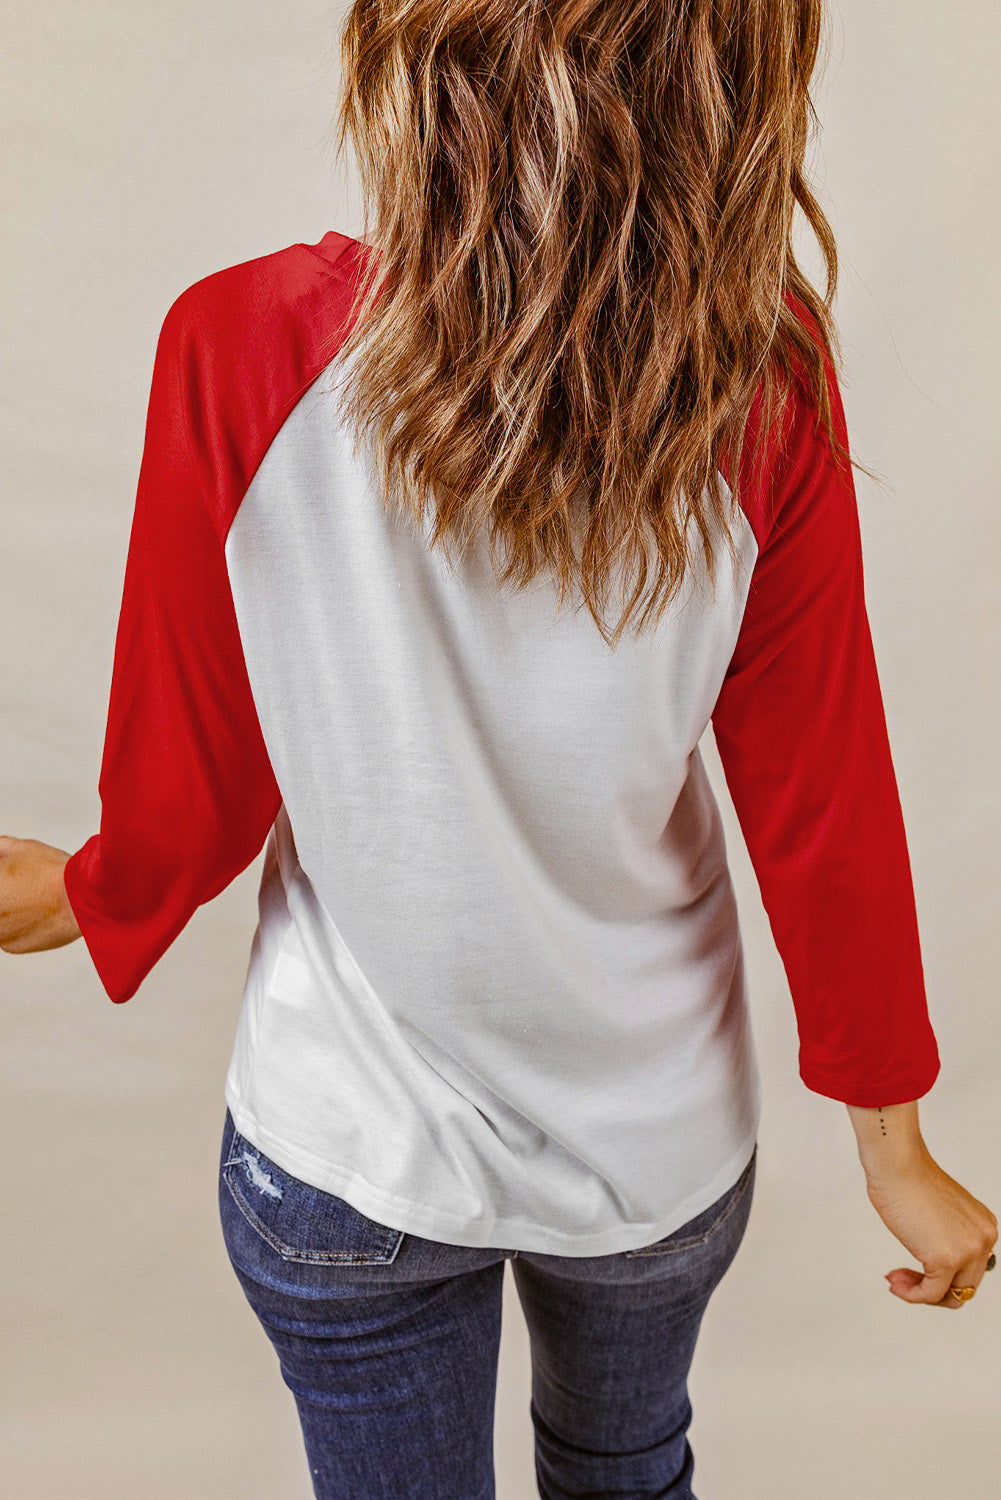 Simply Love PARTY IN THE USA Graphic Raglan Sleeve Tee